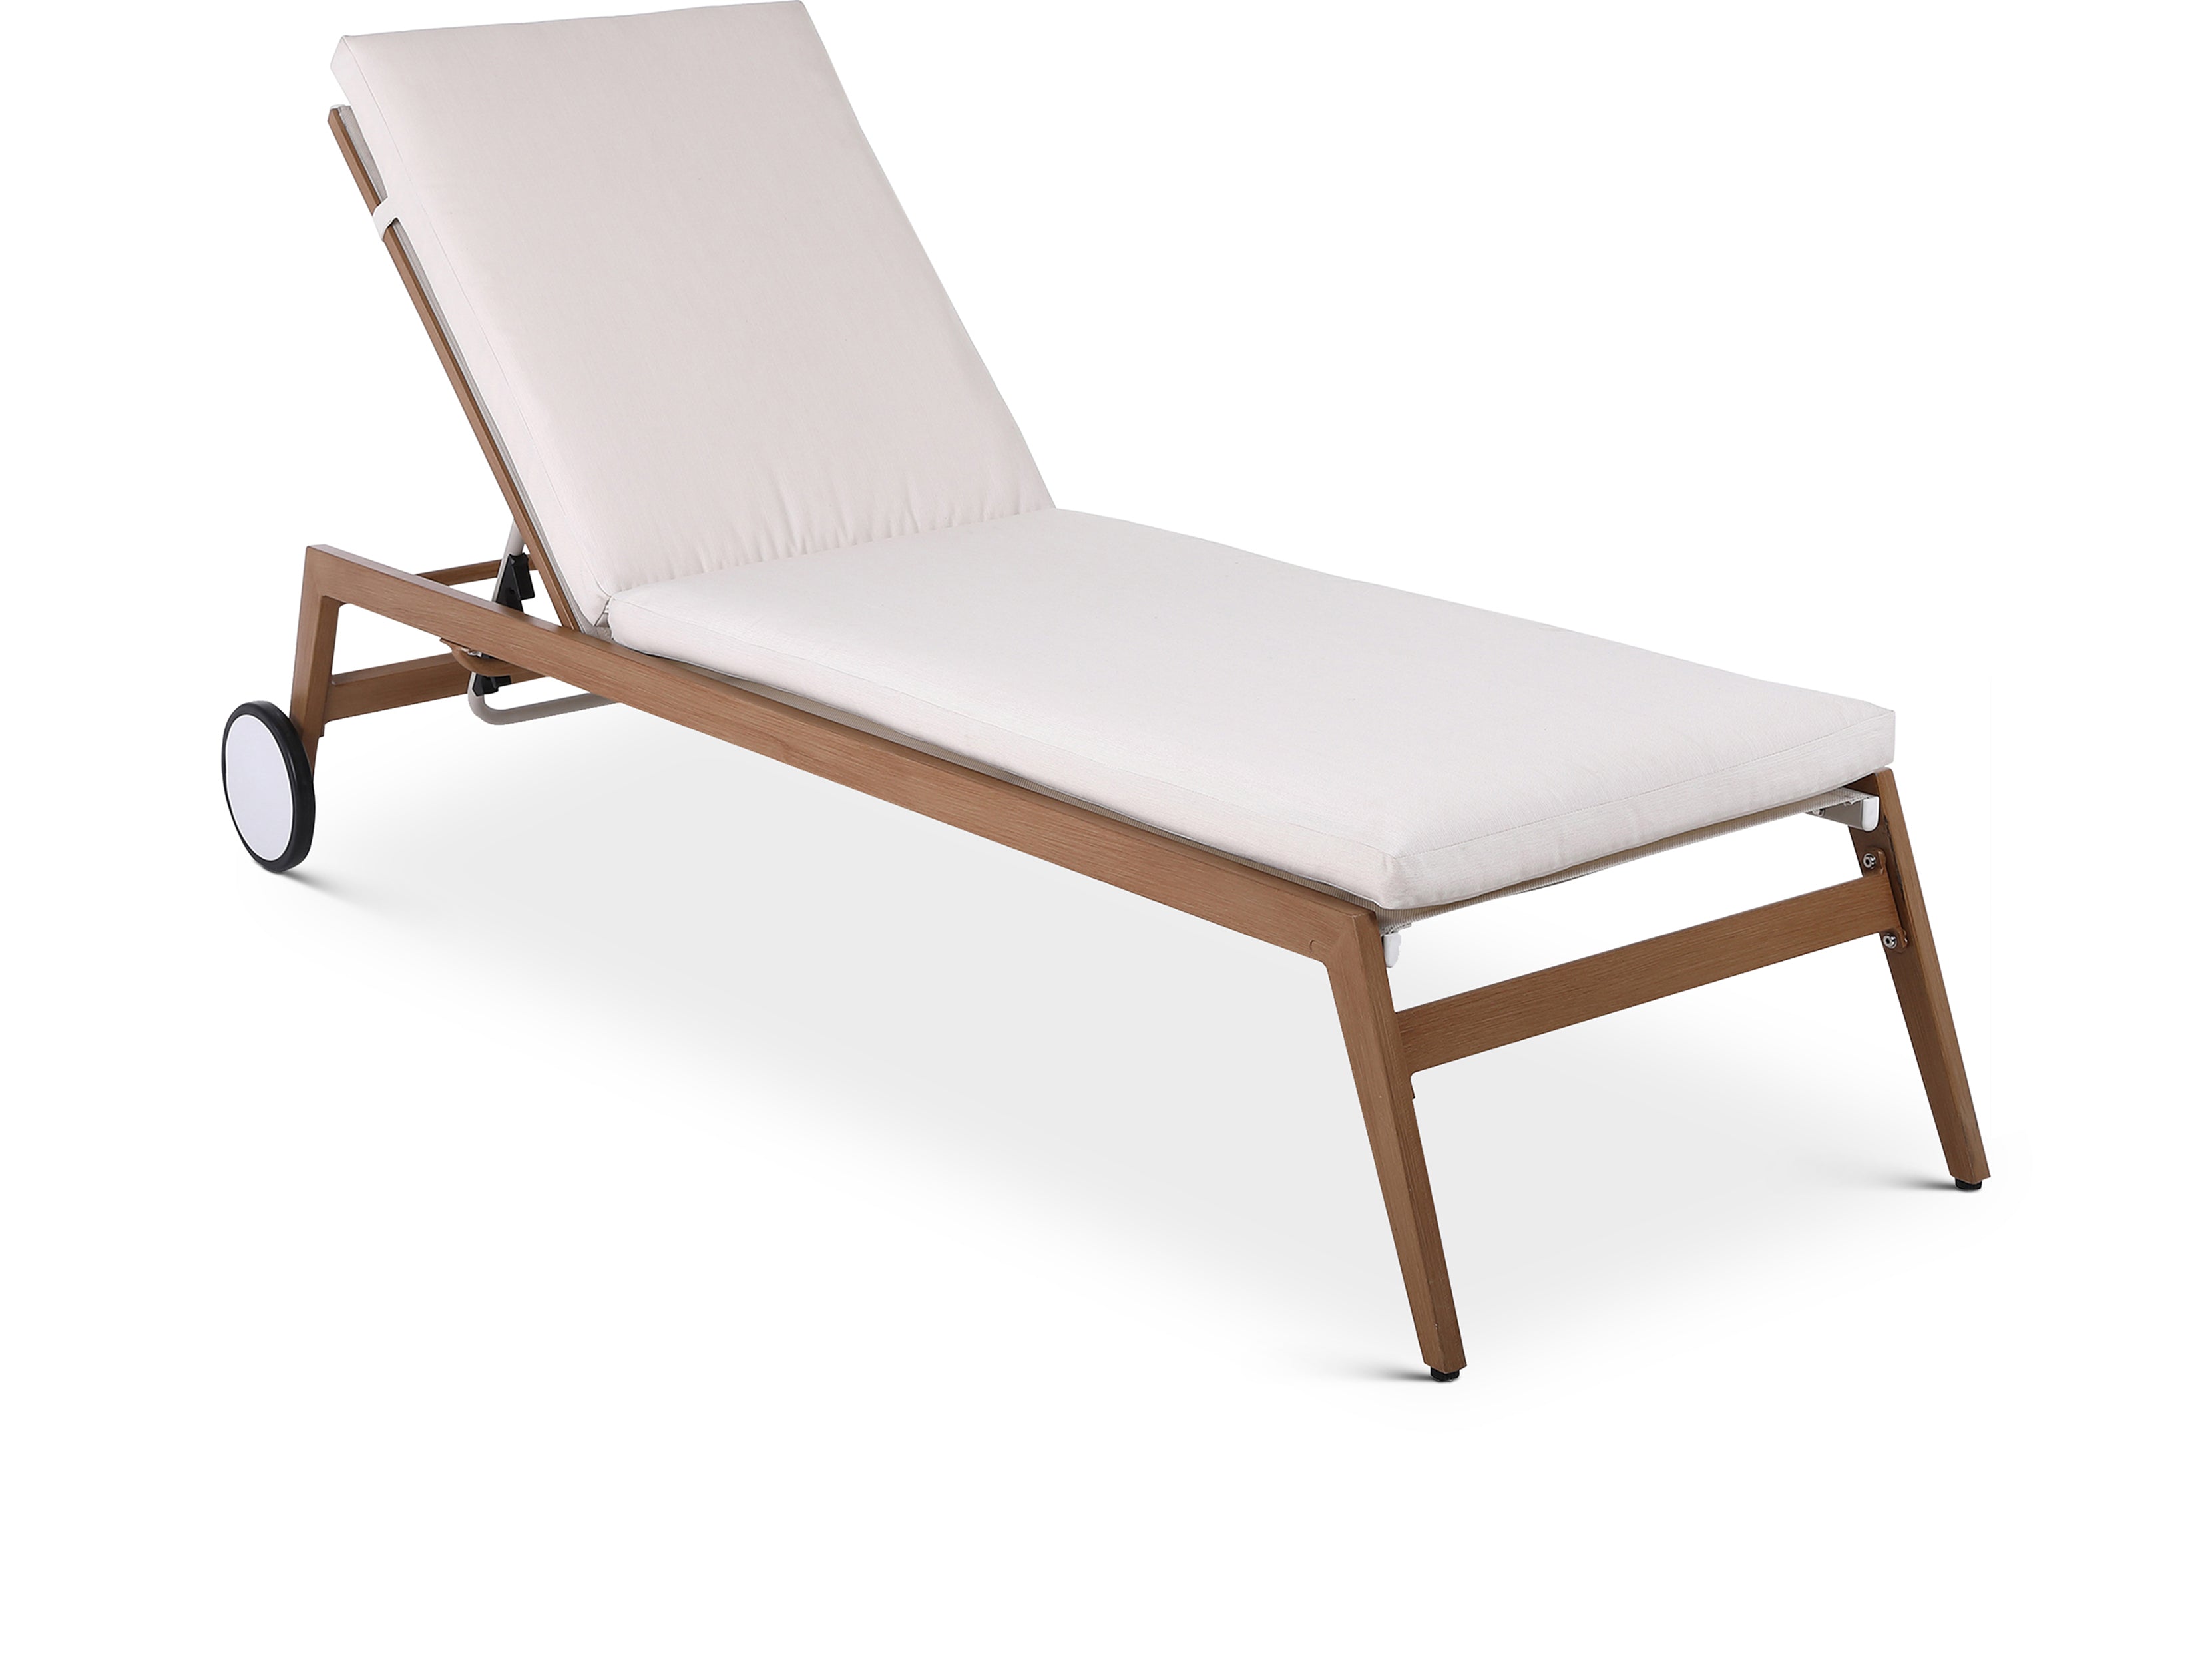 Maui Cream Water Resistant Fabric Outdoor Patio Lounger